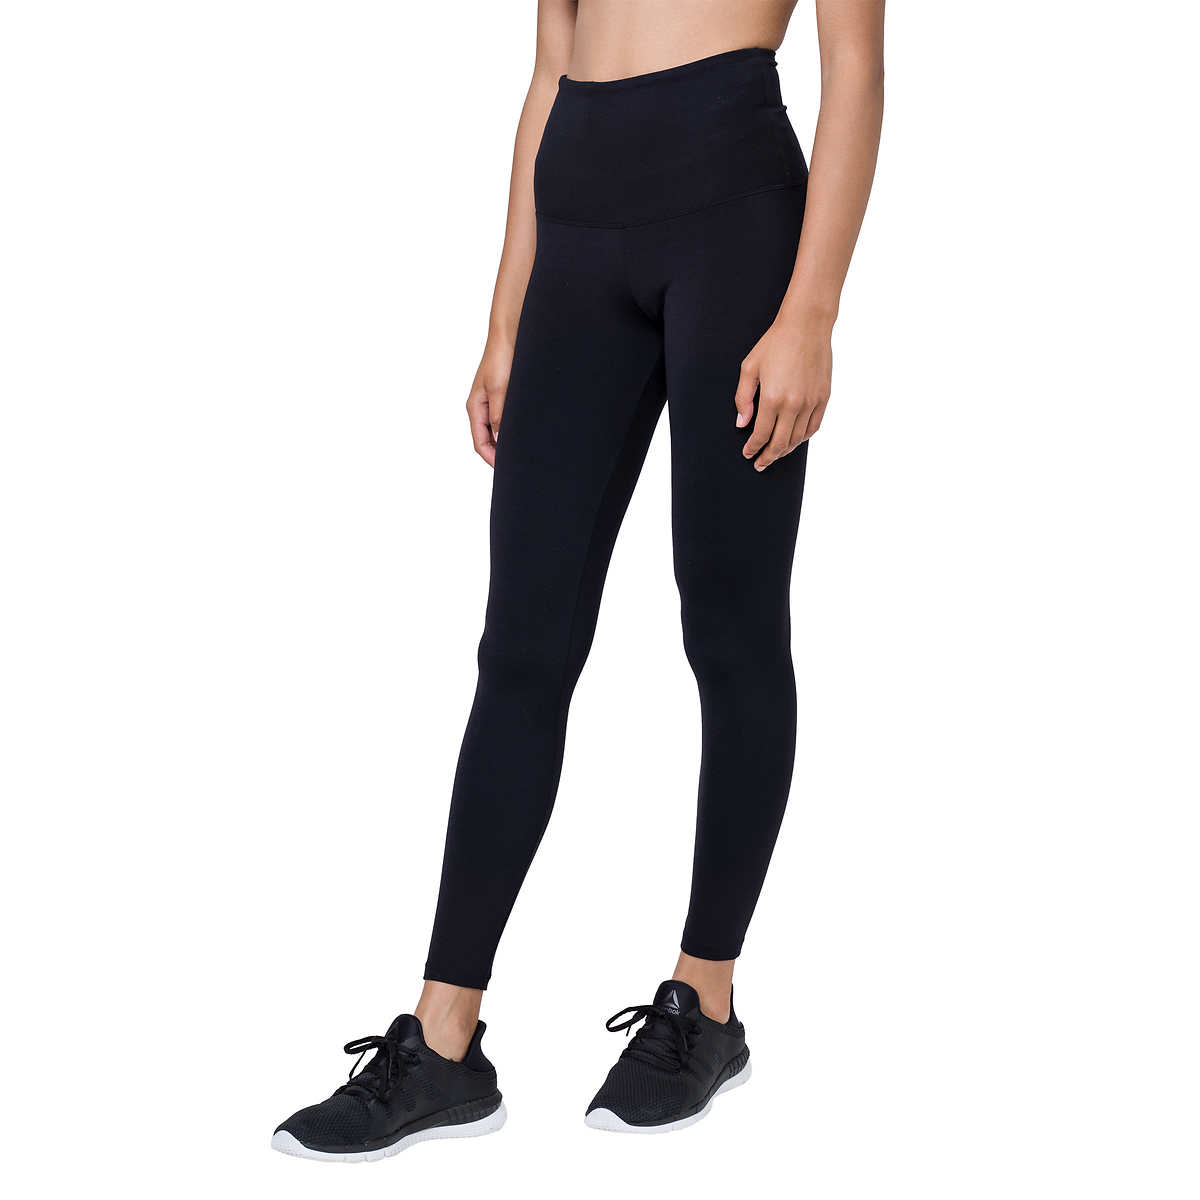 Costco: Tuff Ultra Soft Higher Waist Yoga Pant - 5 for $29.95, 10 for $49.90 (free shipping)